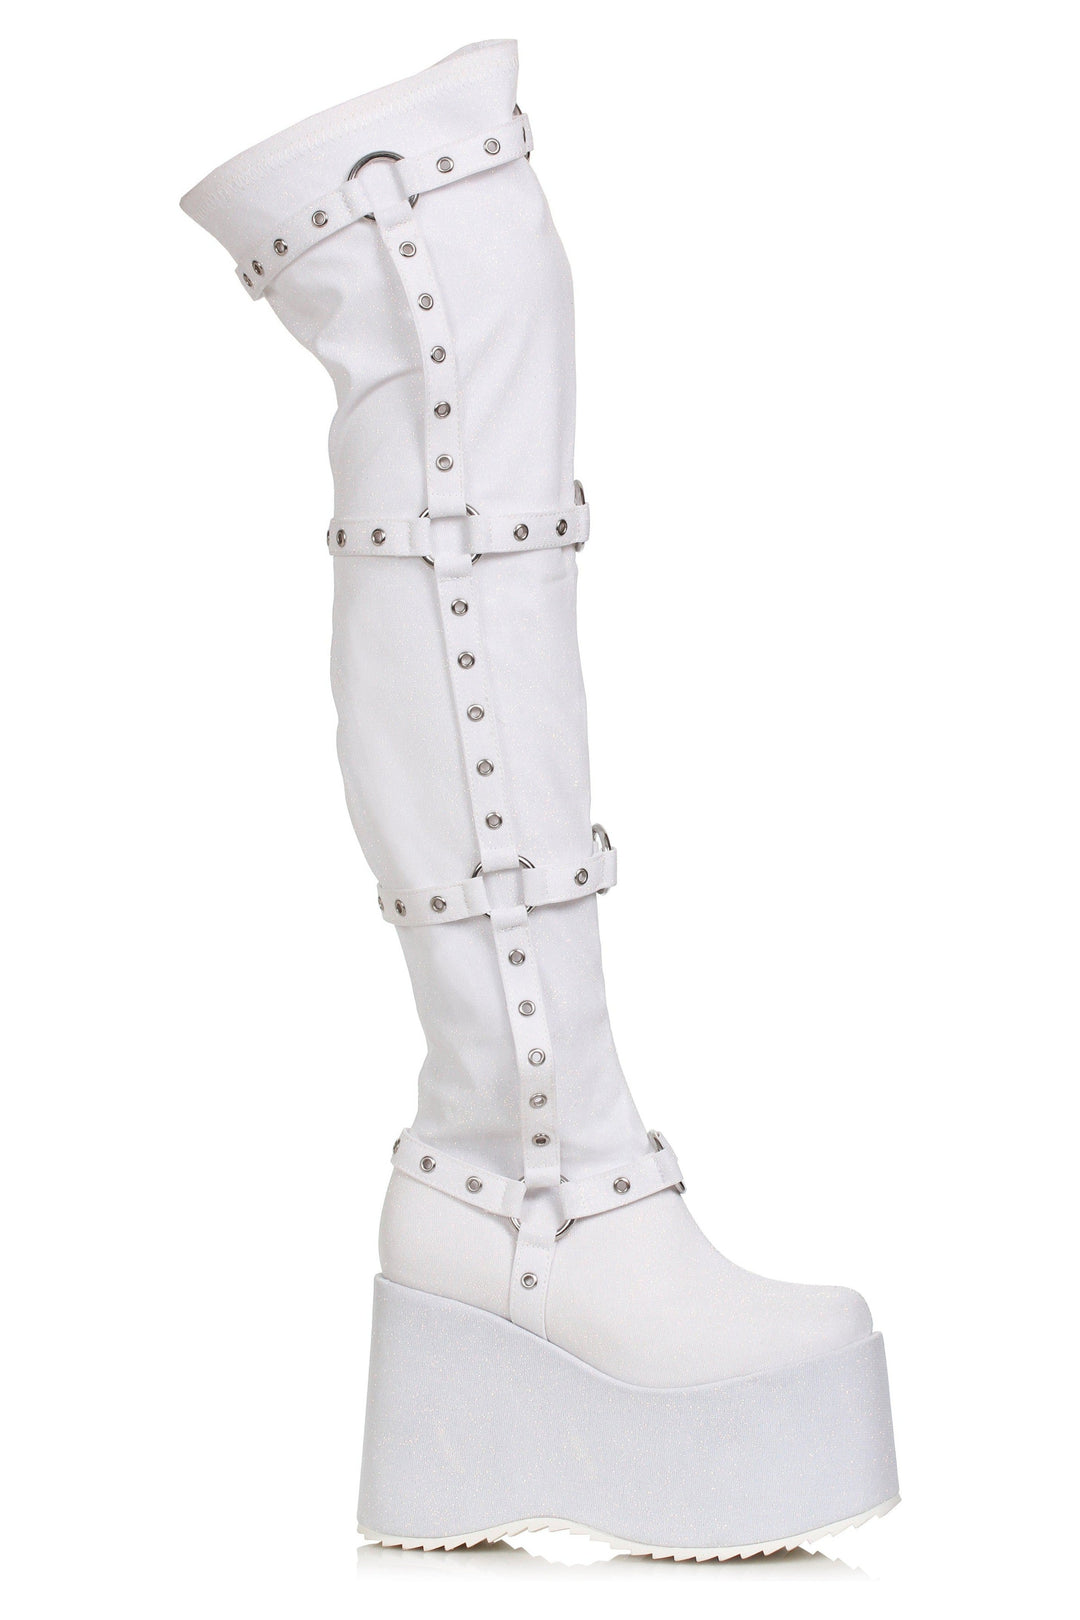 Ellie Shoes 500-FUMIKO Chunky Heel Platform Thigh High Boot with Buckles